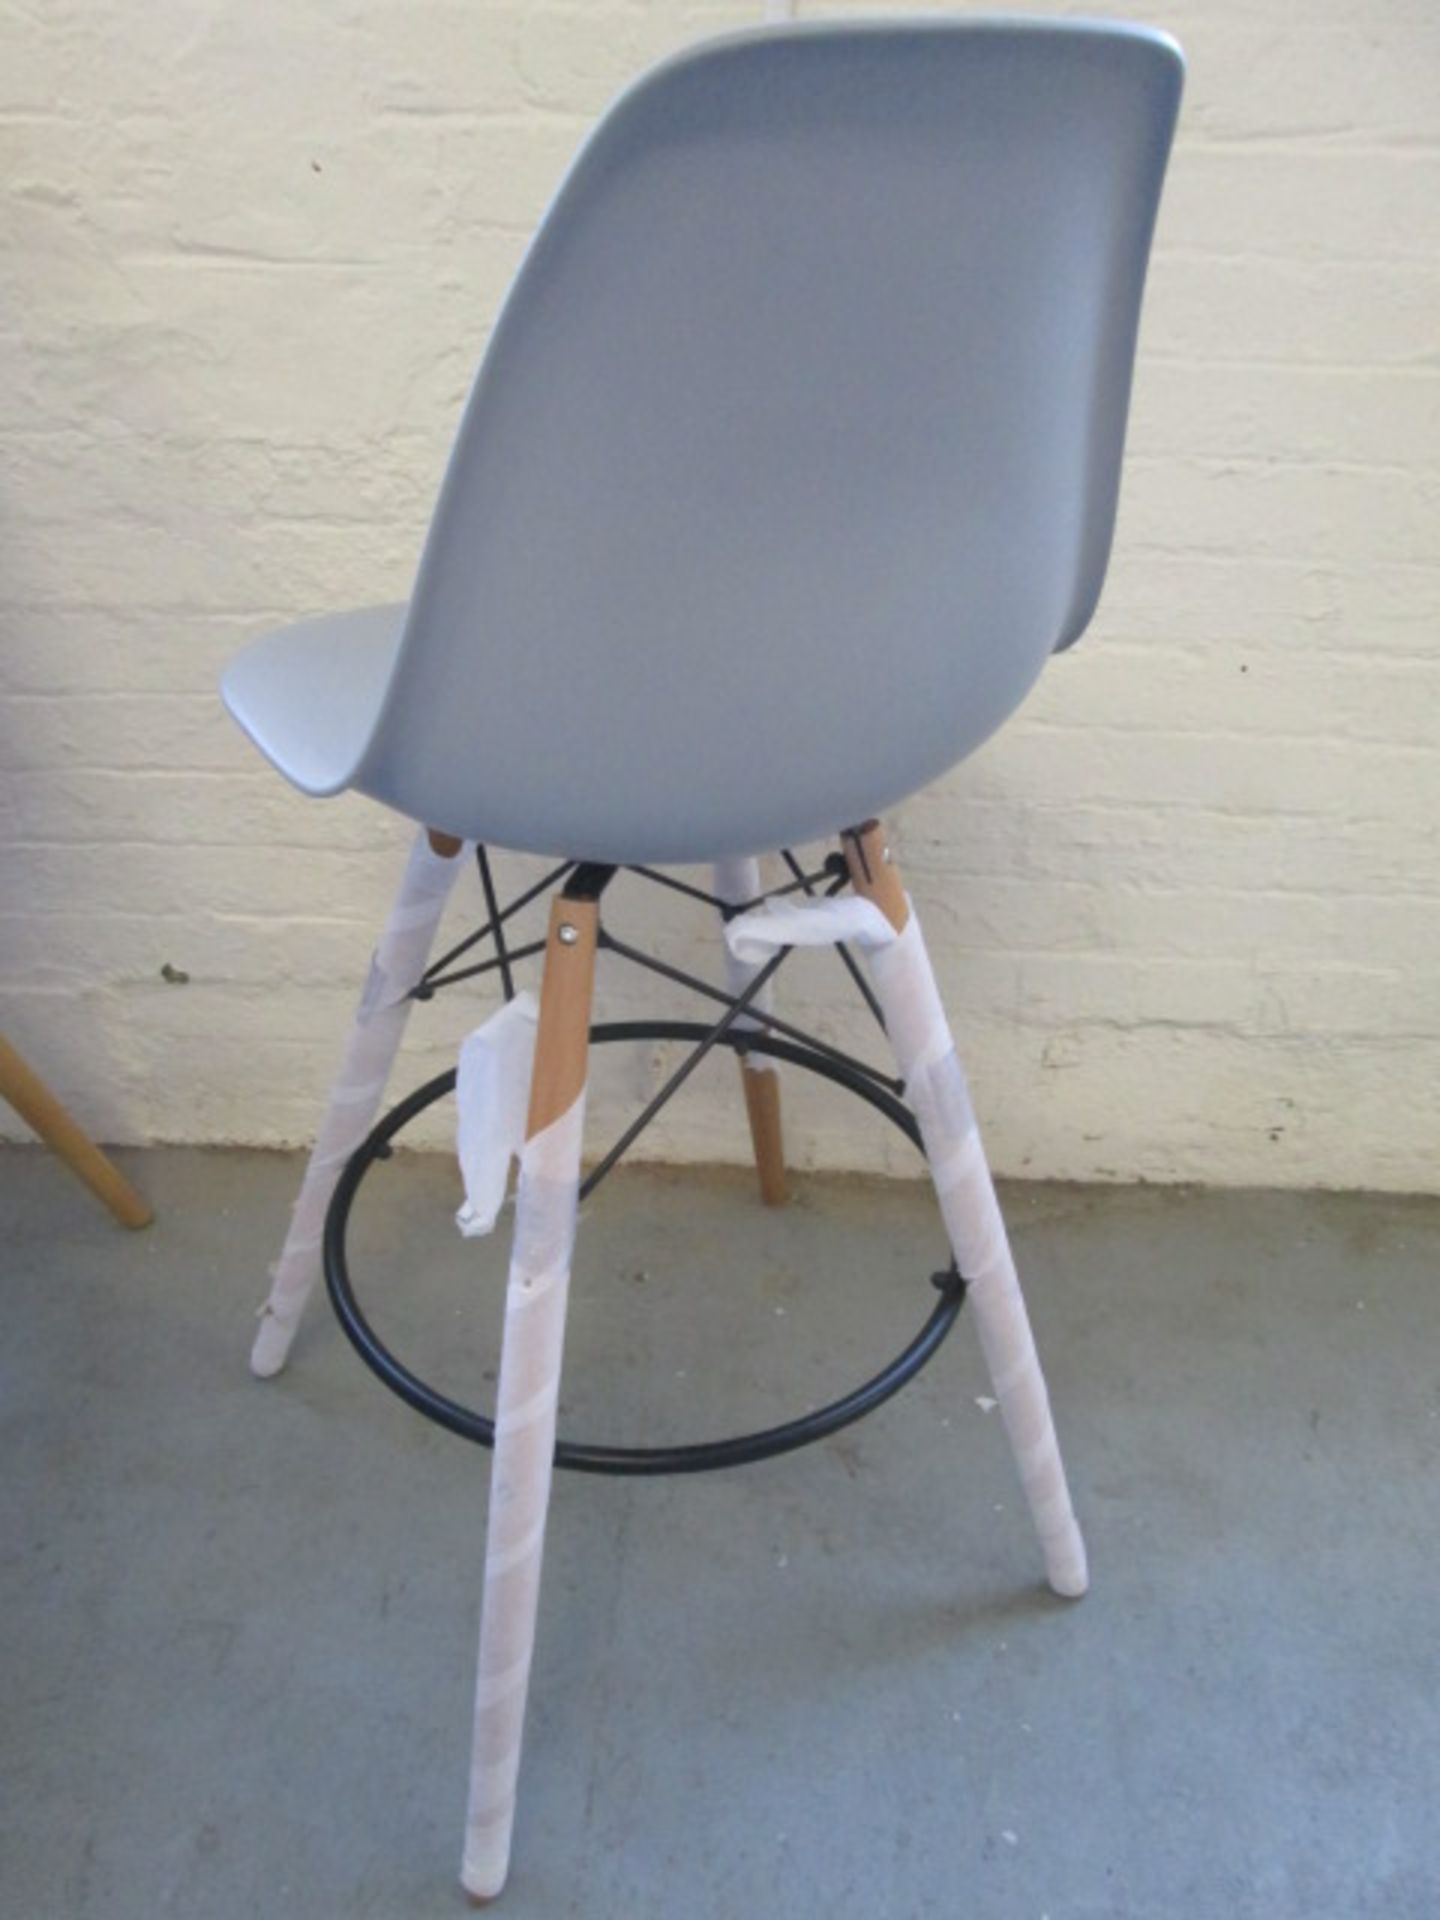 As New: Grey DSW Bar Stool in Charles Eames Style in Polypropylene Matt. - Image 2 of 2